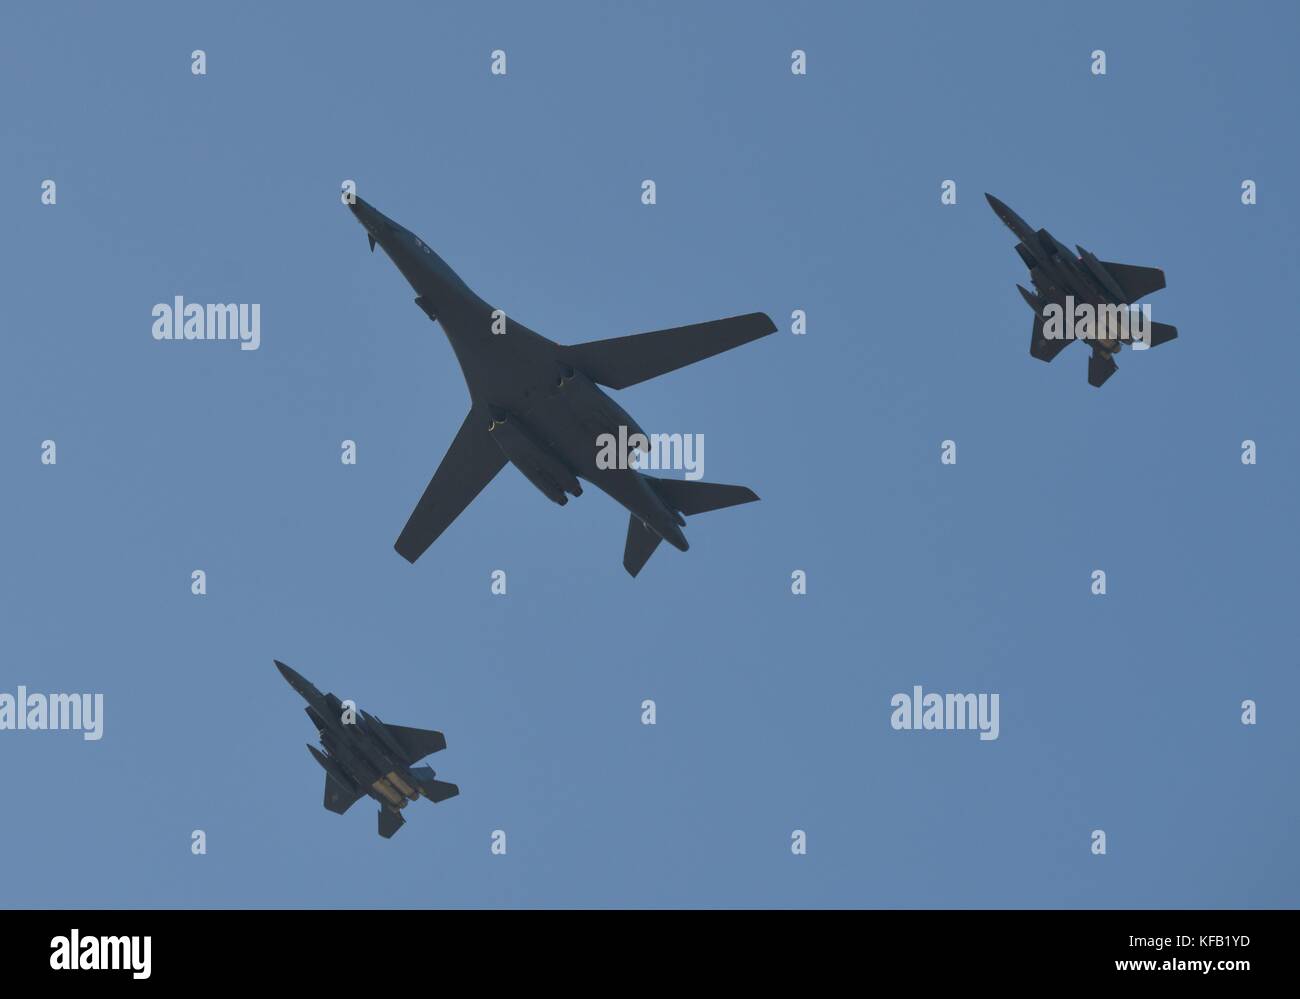 A U.S. Air Force B-1B Lancer strategic bomber aircraft and two South Korean Air Force F-15K Slam Eagle fighter aircraft fly in formation over the Seoul Airport during the Seoul Aerospace and Defense Exhibition October 21, 2017 in Seoul, Republic of Korea.   (photo by Alex Echols via Planetpix) Stock Photo